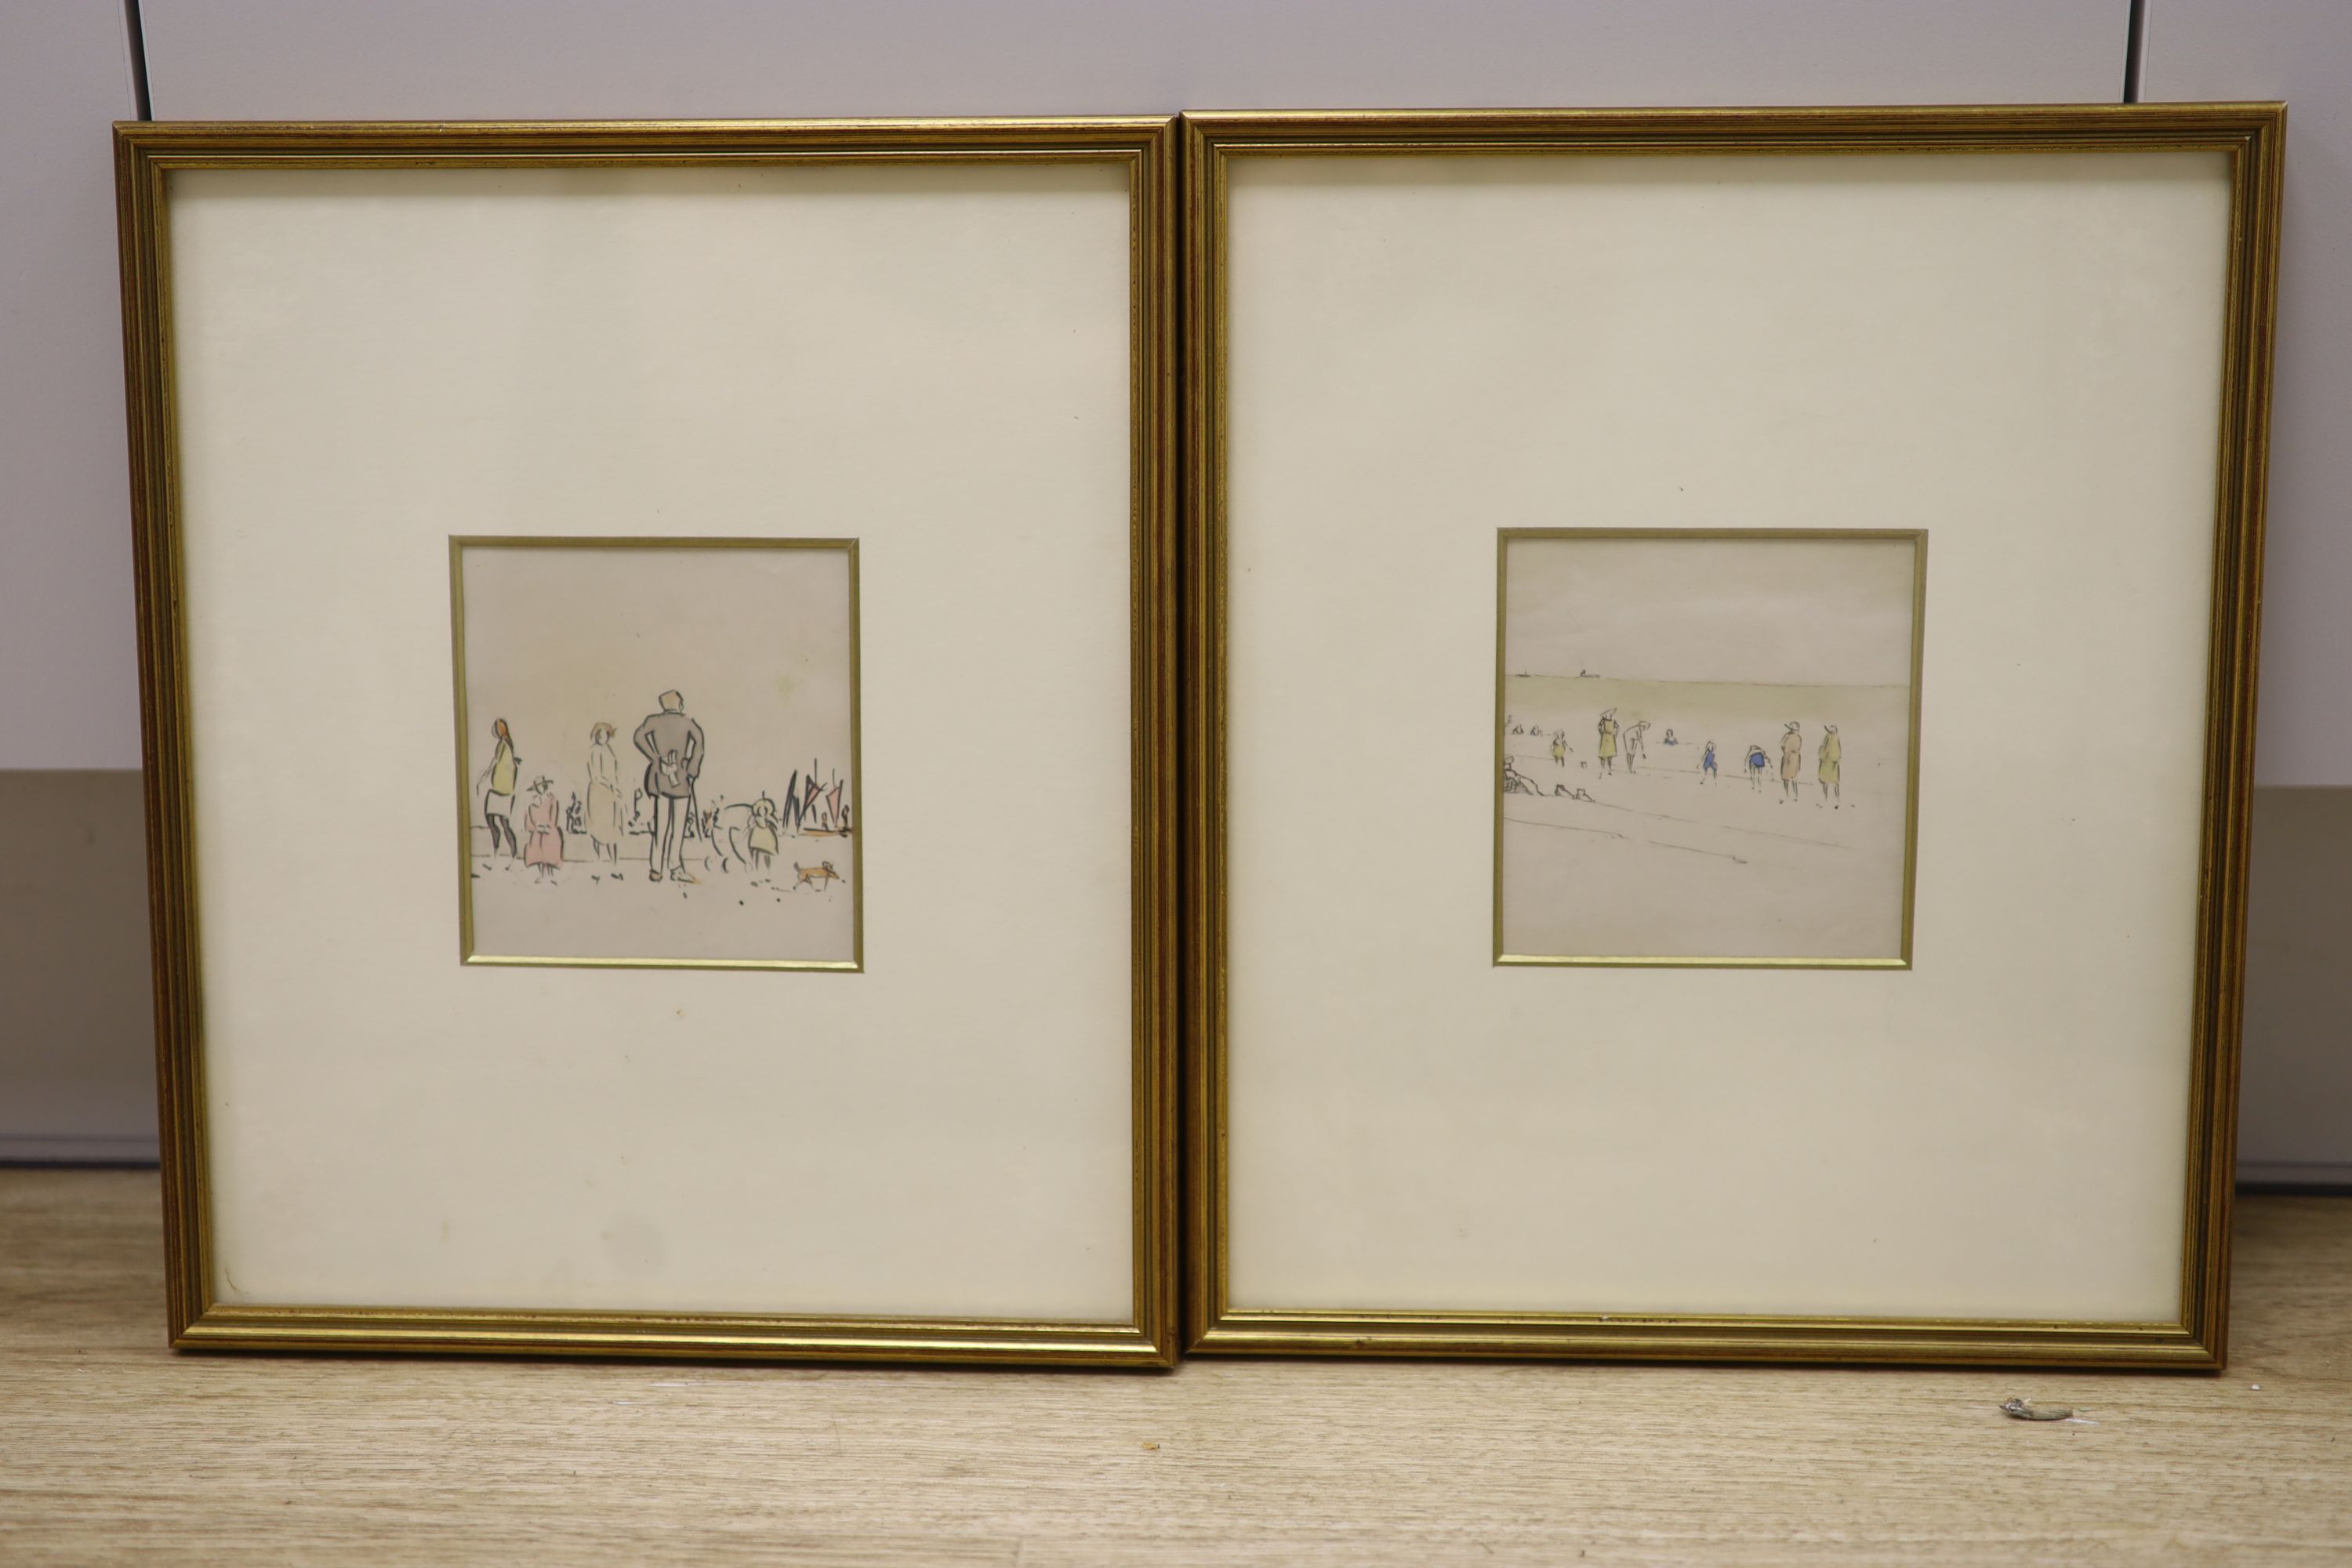 Cecil Howard Lay (1885-1956), two watercolour drawings, Yarmouth Beach, Fry Gallery label verso, 11 x 10cm